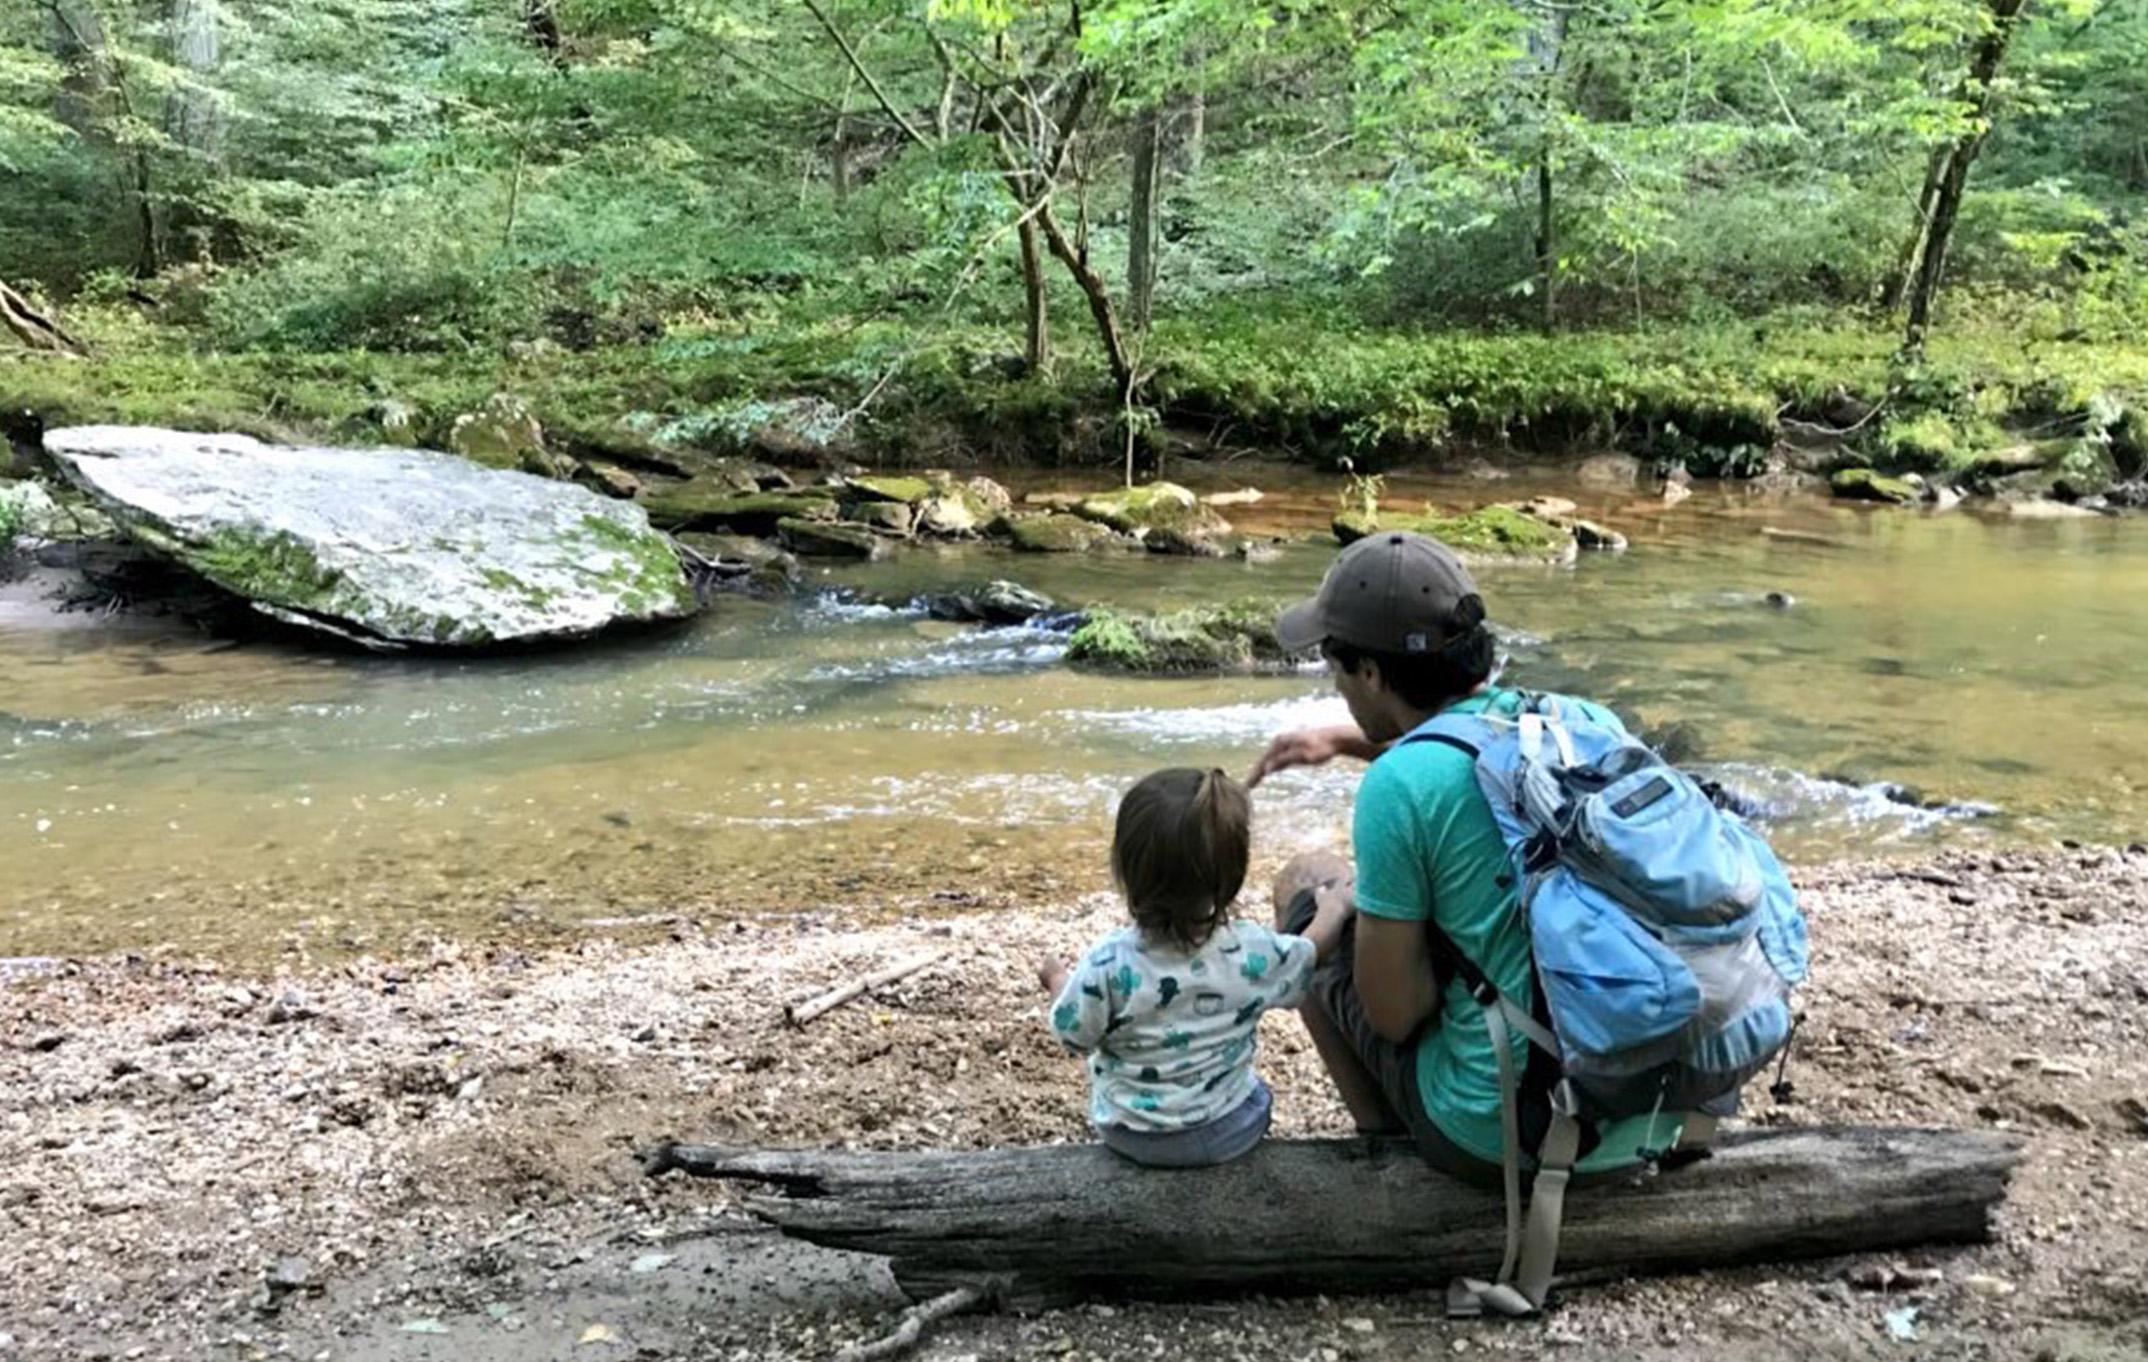  A parent and child sit on a log beside a stream and enjoy each other's company in nature's beauty.